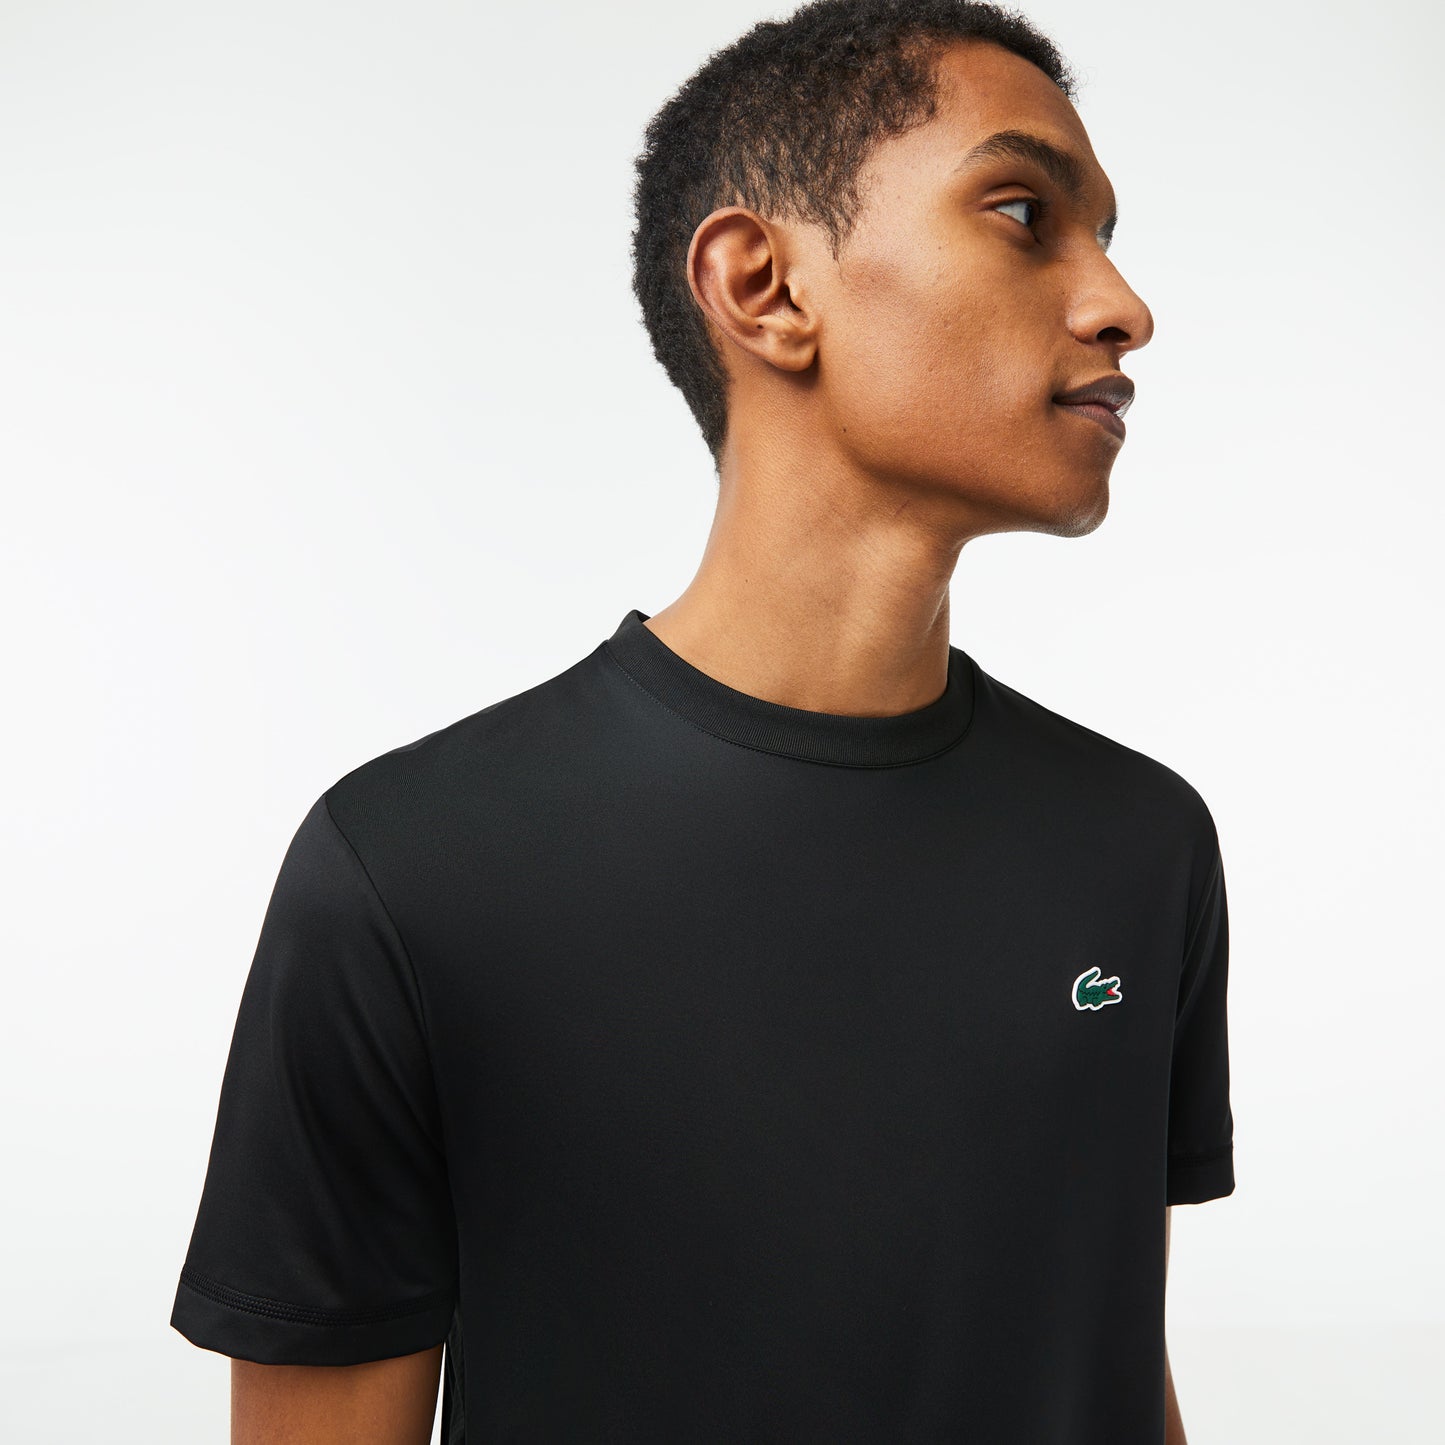 Mens Lacoste Sport Slim Fit Stretch Jersey T-shirt